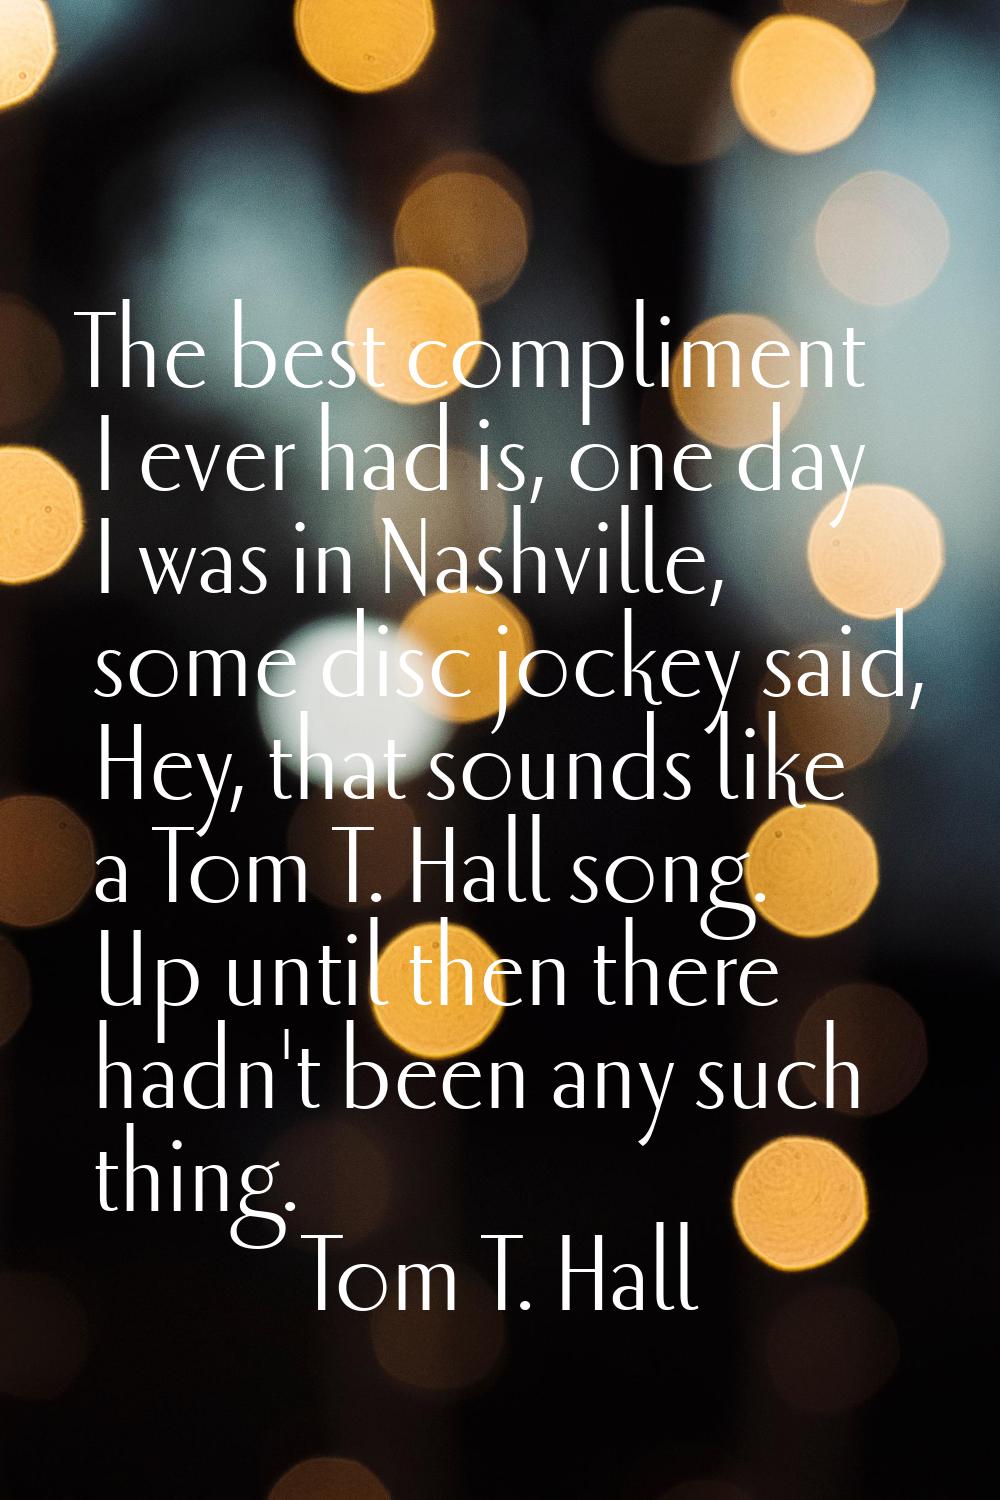 The best compliment I ever had is, one day I was in Nashville, some disc jockey said, Hey, that sou